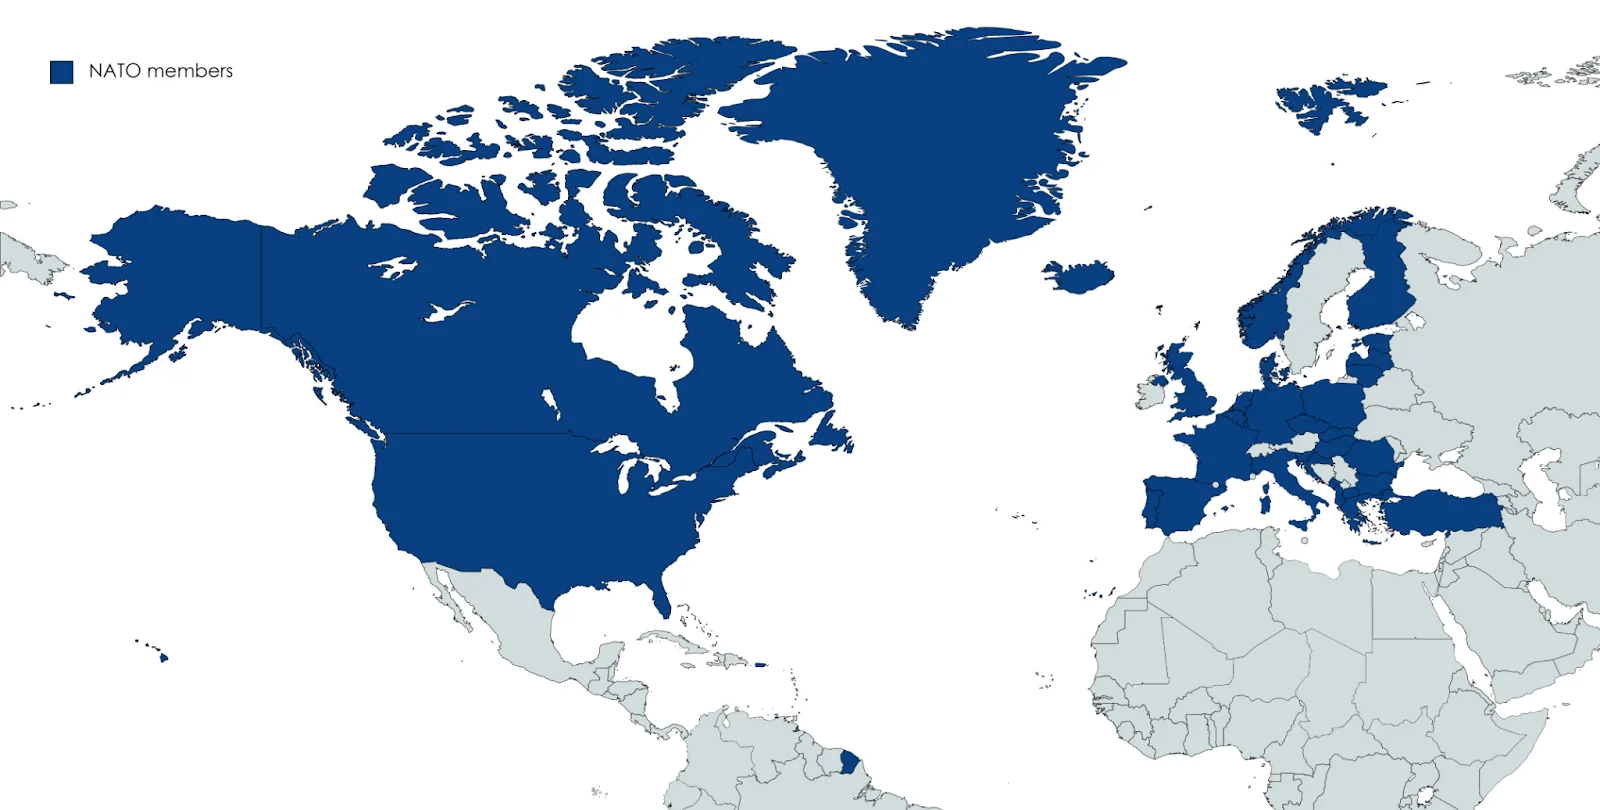 NATO Member Countries, Targeted by Star Blizzard (Wikipedia)